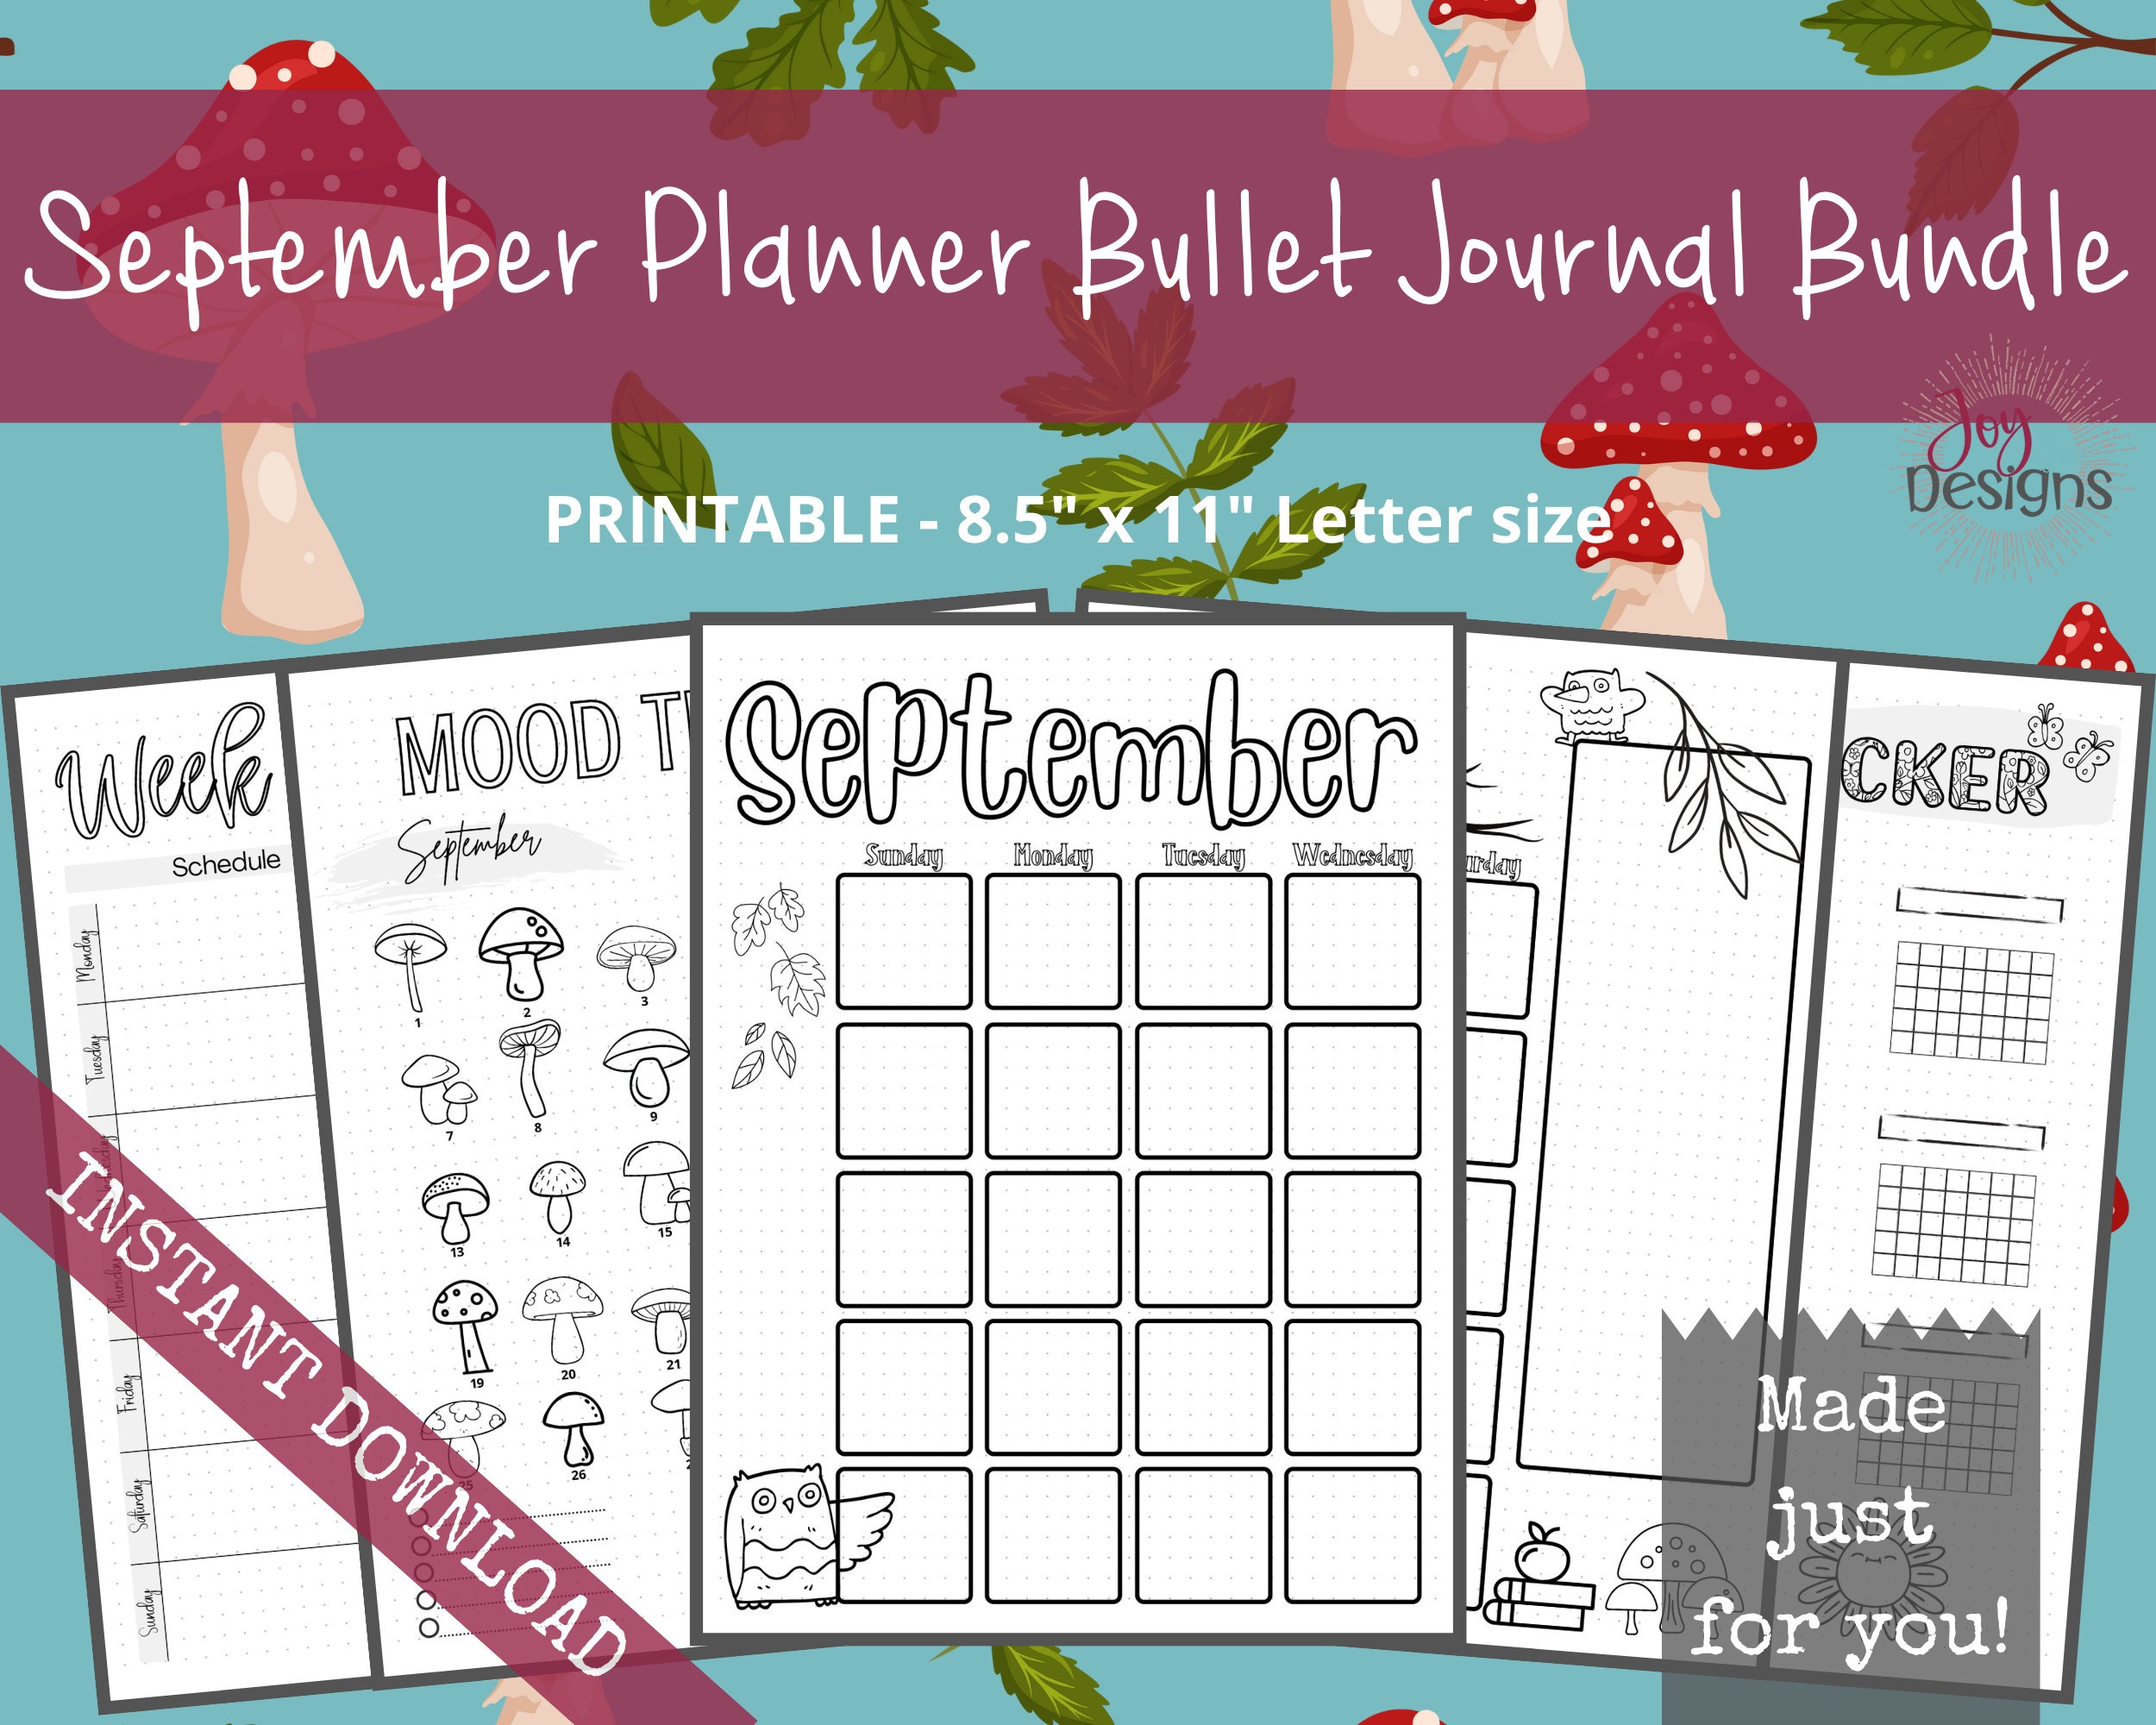 2024 Pre-Made Bullet Dotted Journal Pages; Instant Download Printable  Planner. A Premade Dotted Planner. Track Anxiety and Mental Health. - Joy  Dean Designs